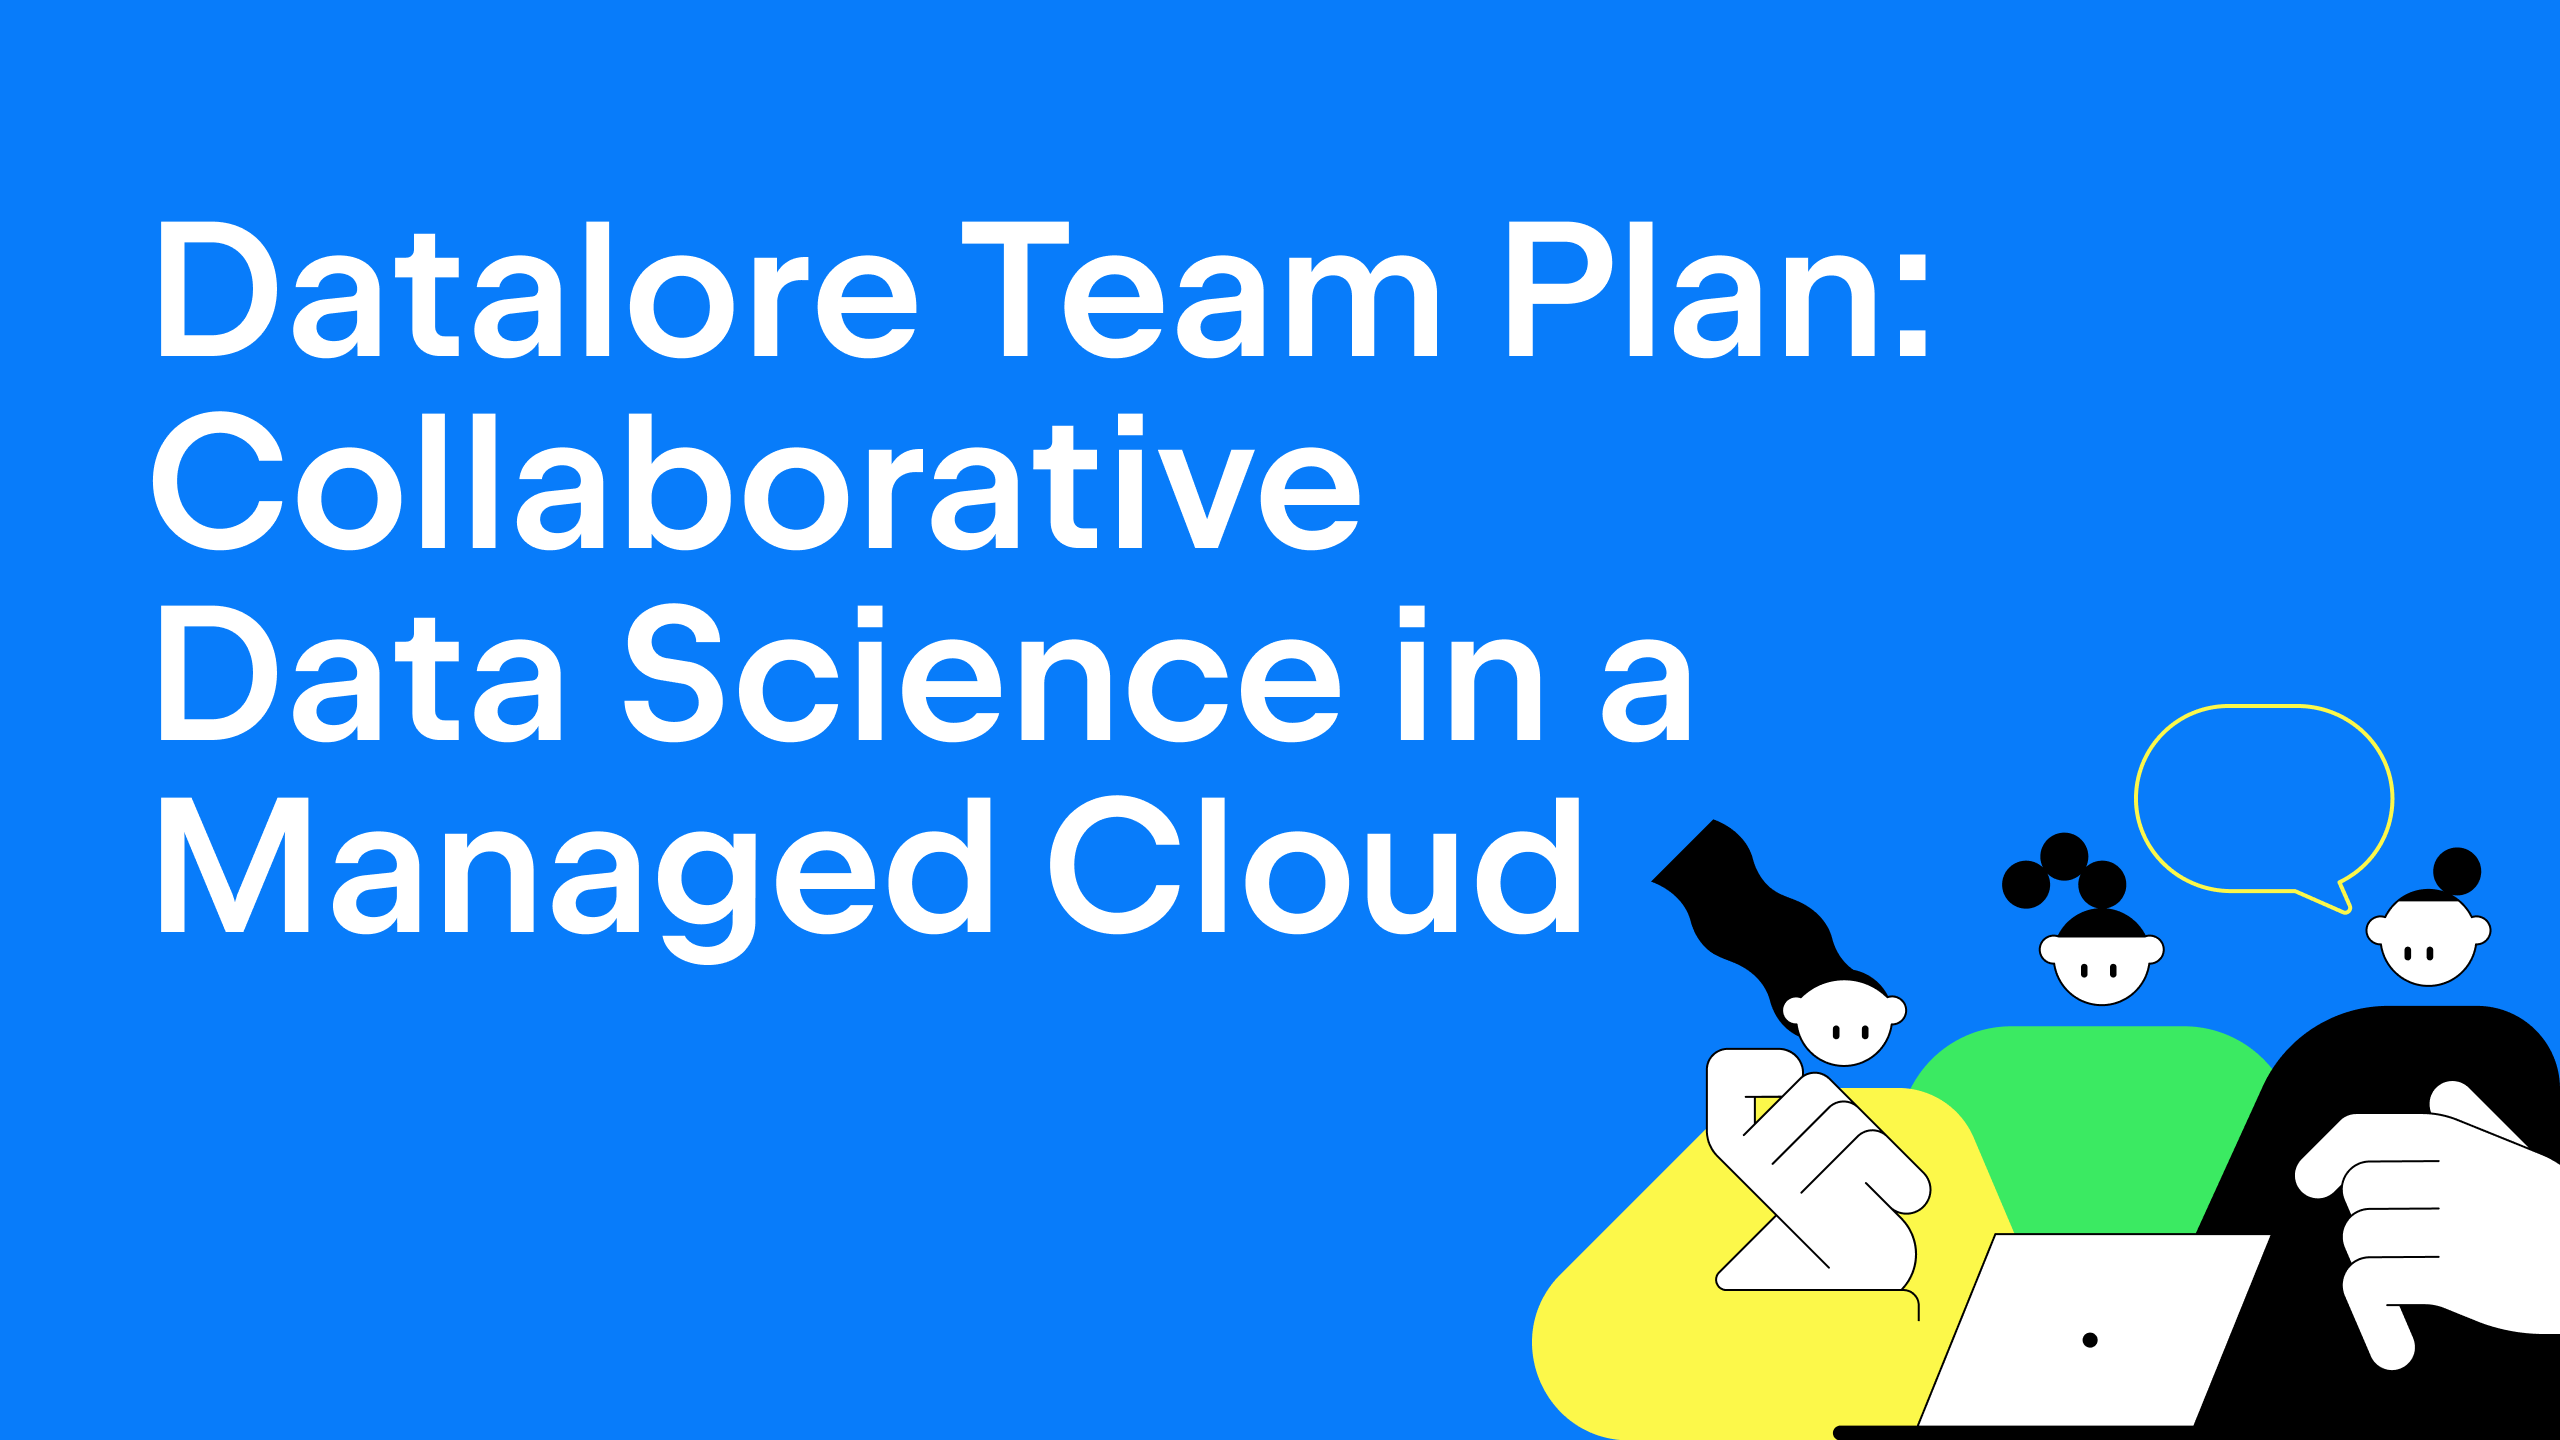 Datalore Team Plan: Collaborative Data Science in a Managed Cloud